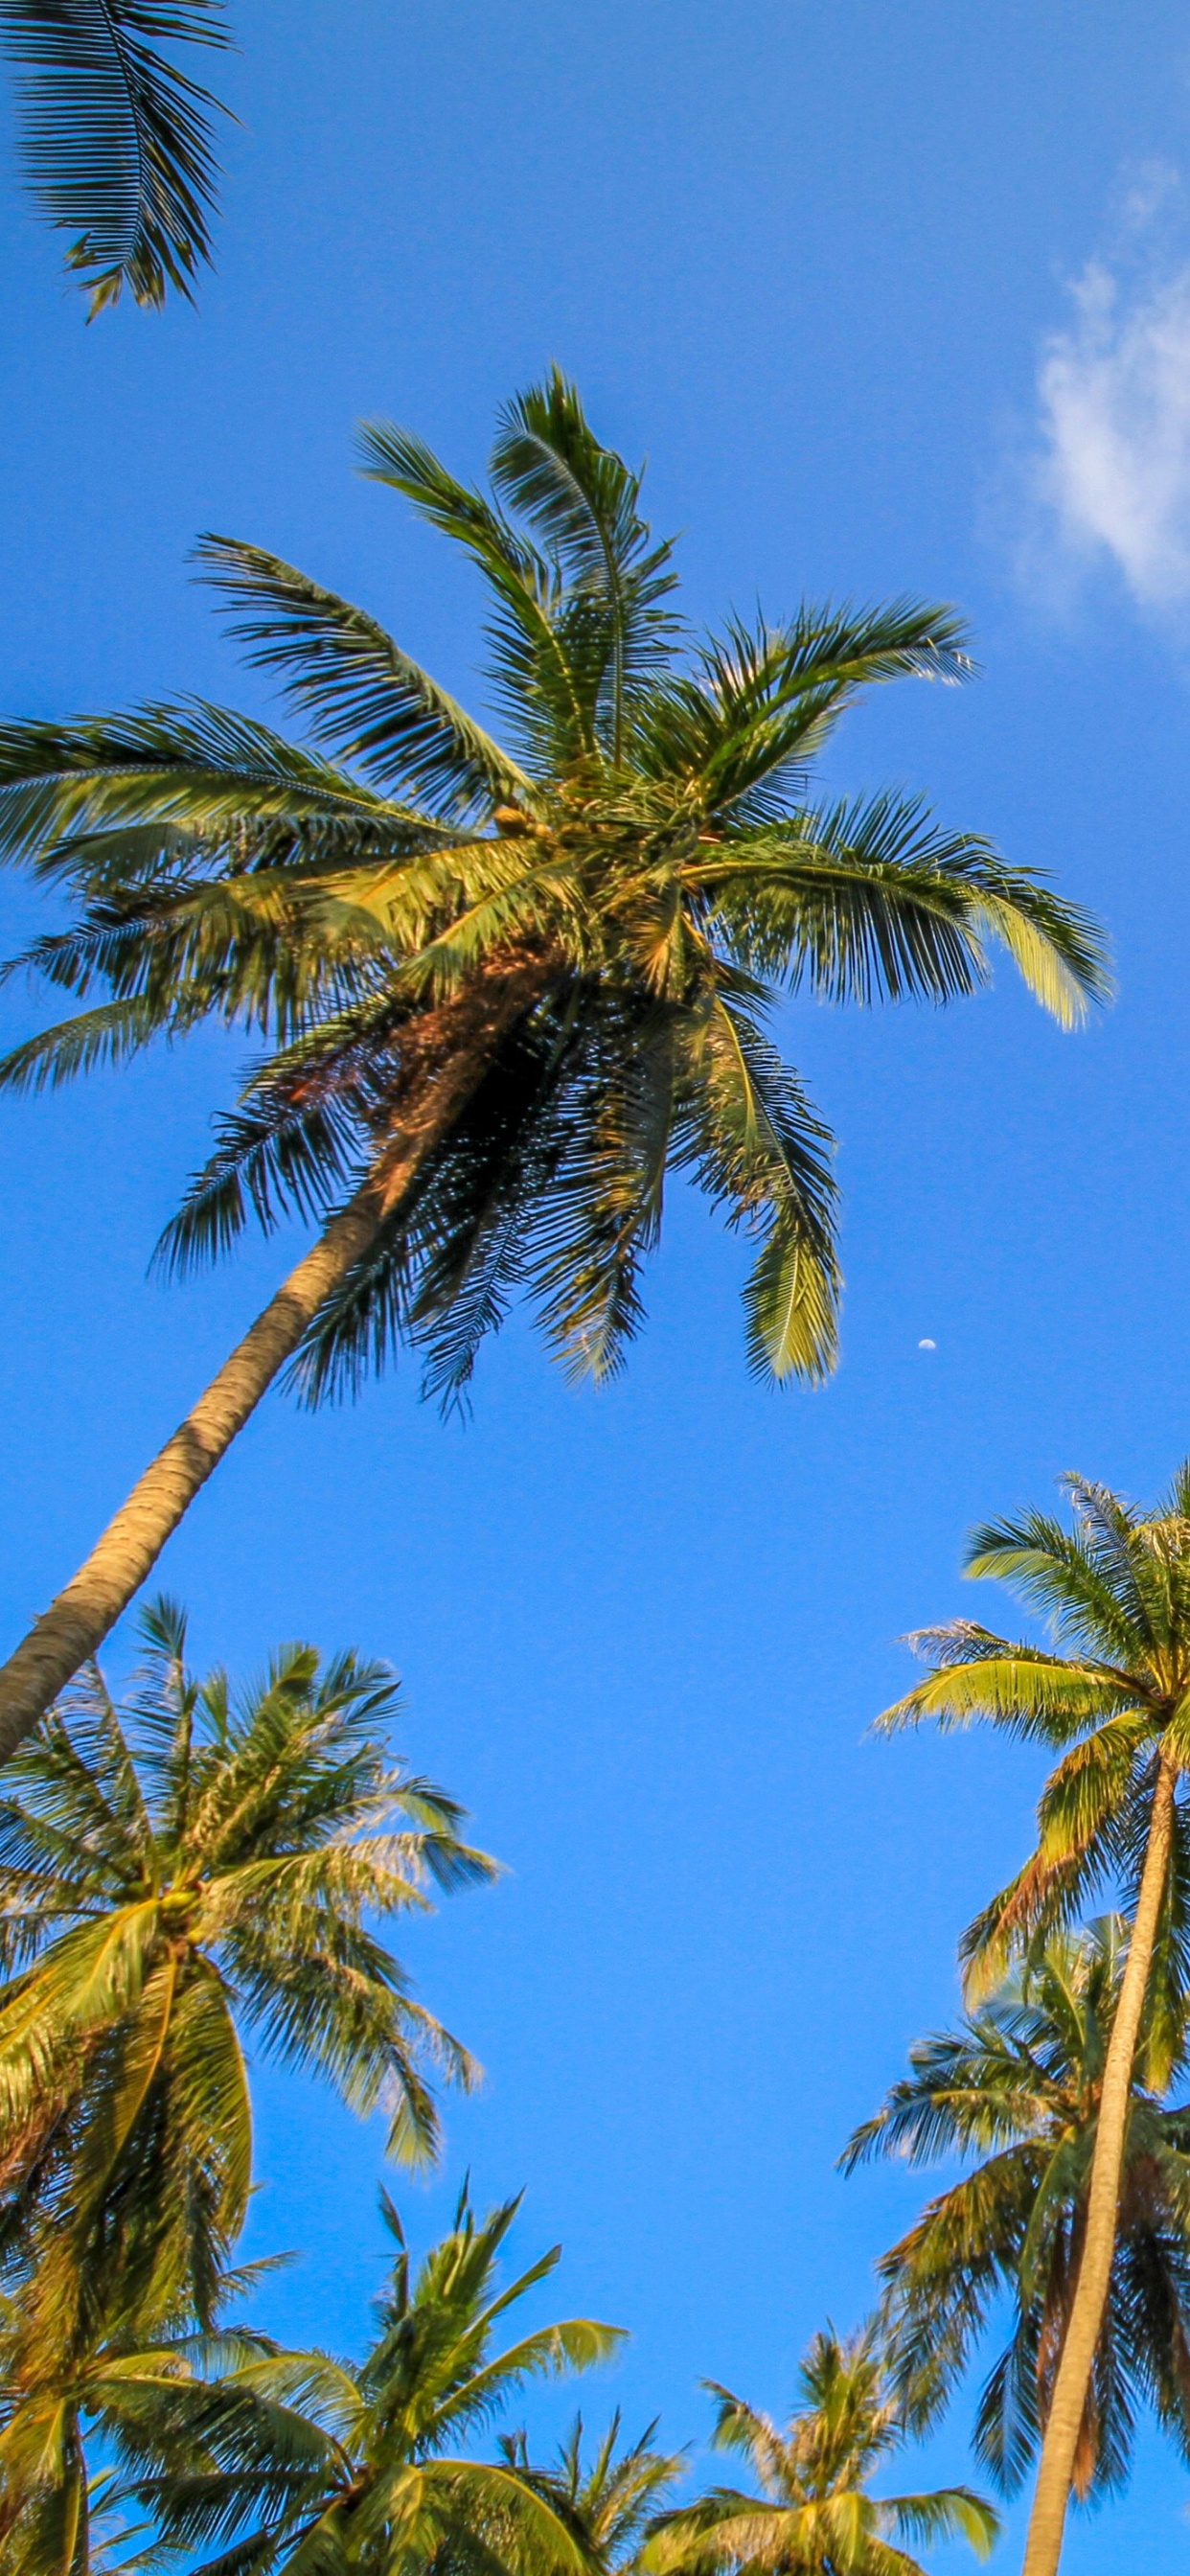 Green Palm Tree Under Blue Sky During Daytime. Wallpaper in 1242x2688 Resolution